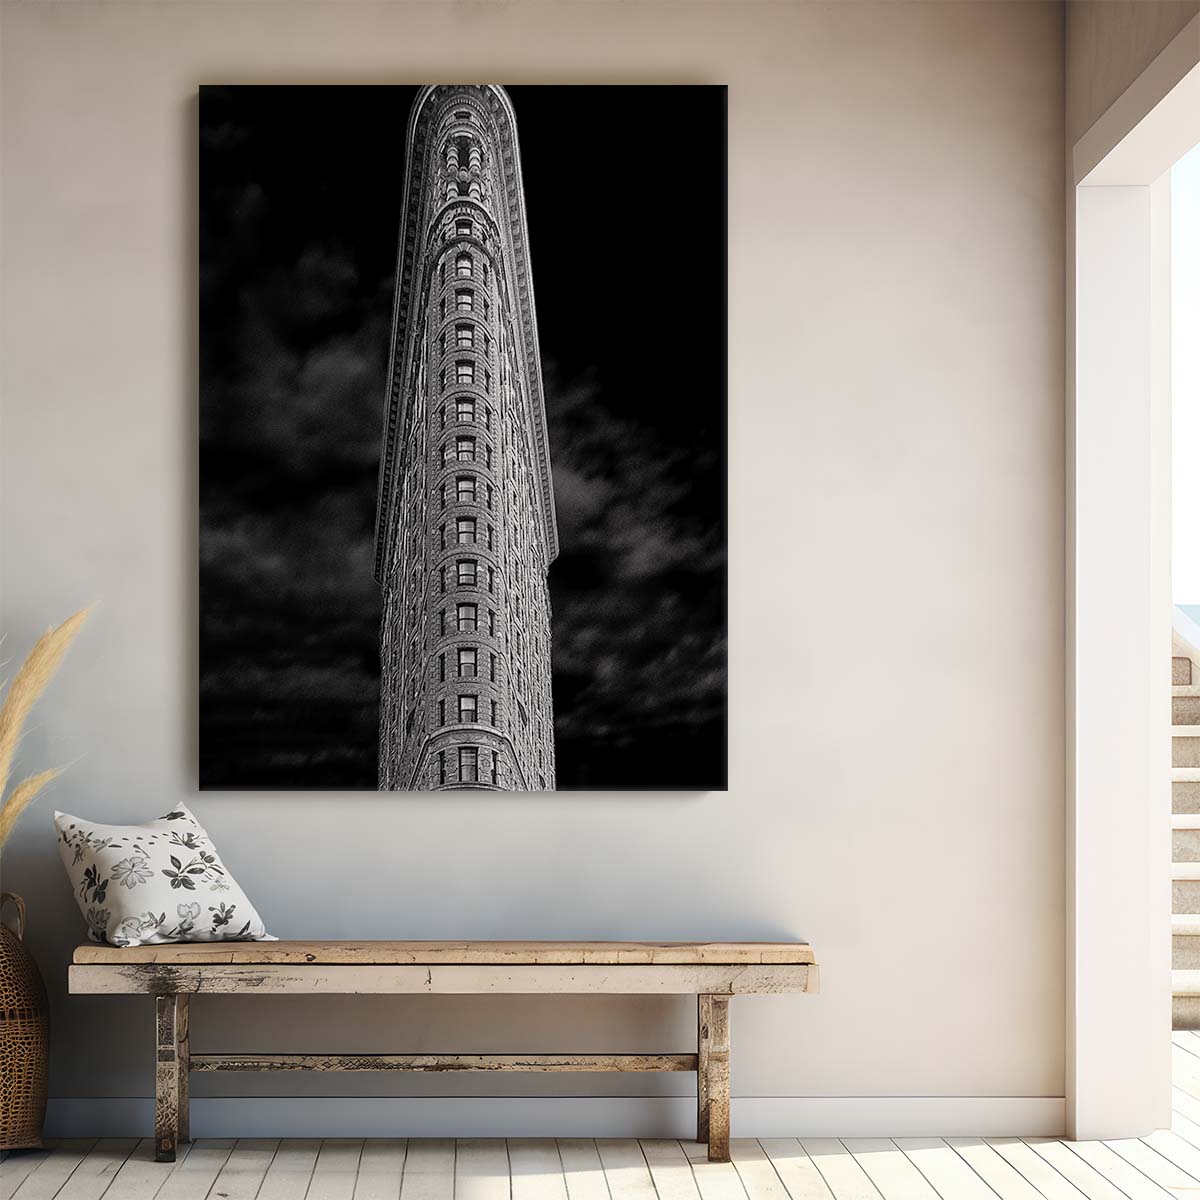 Black and White Flatiron Building Photography, Iconic NYC Landmark Wall Art by Luxuriance Designs, made in USA